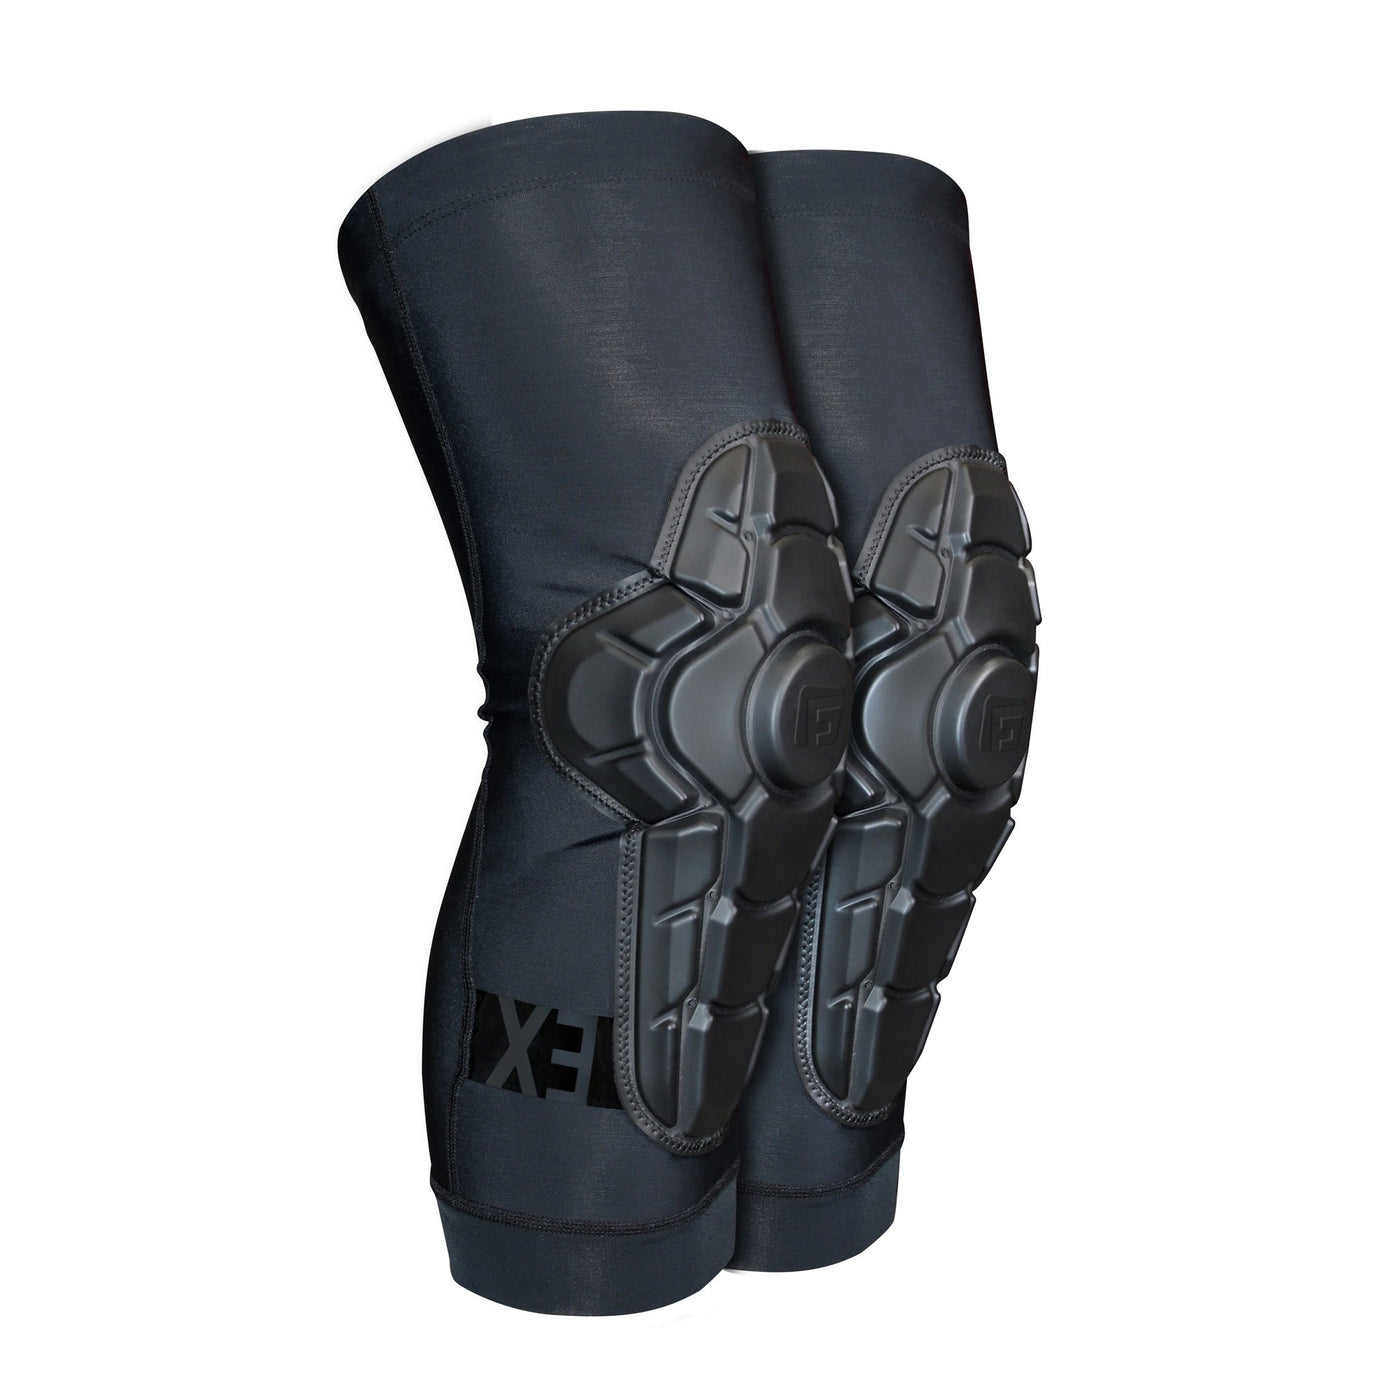 G-Form Protection Youth Pro-X3 Knee Guard